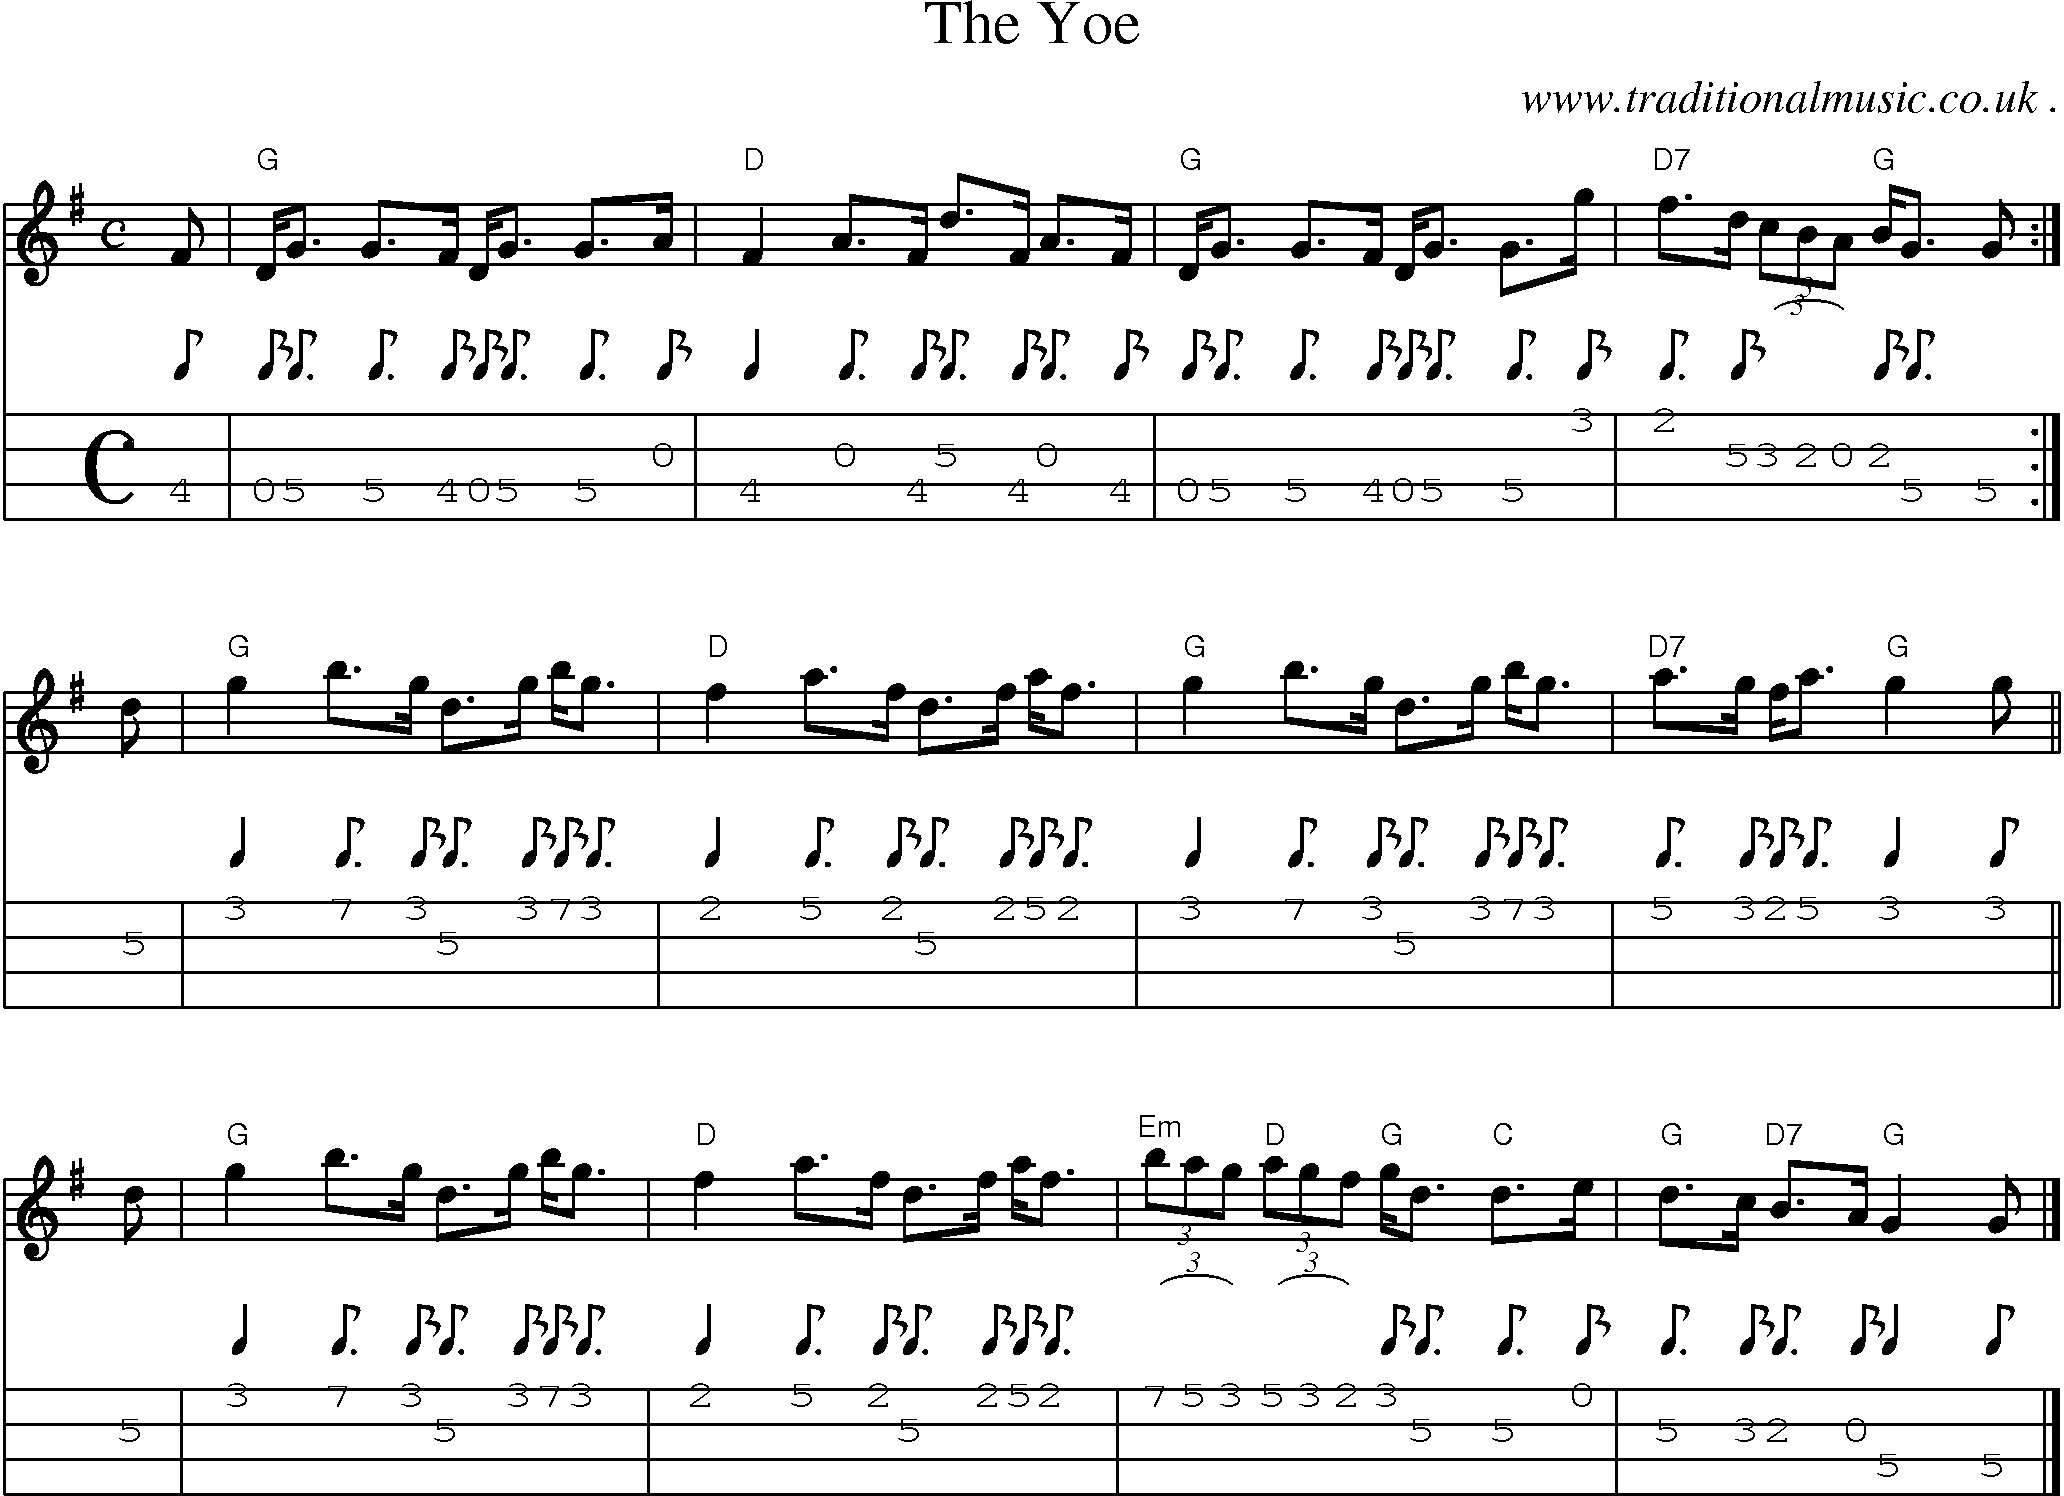 Sheet-music  score, Chords and Mandolin Tabs for The Yoe